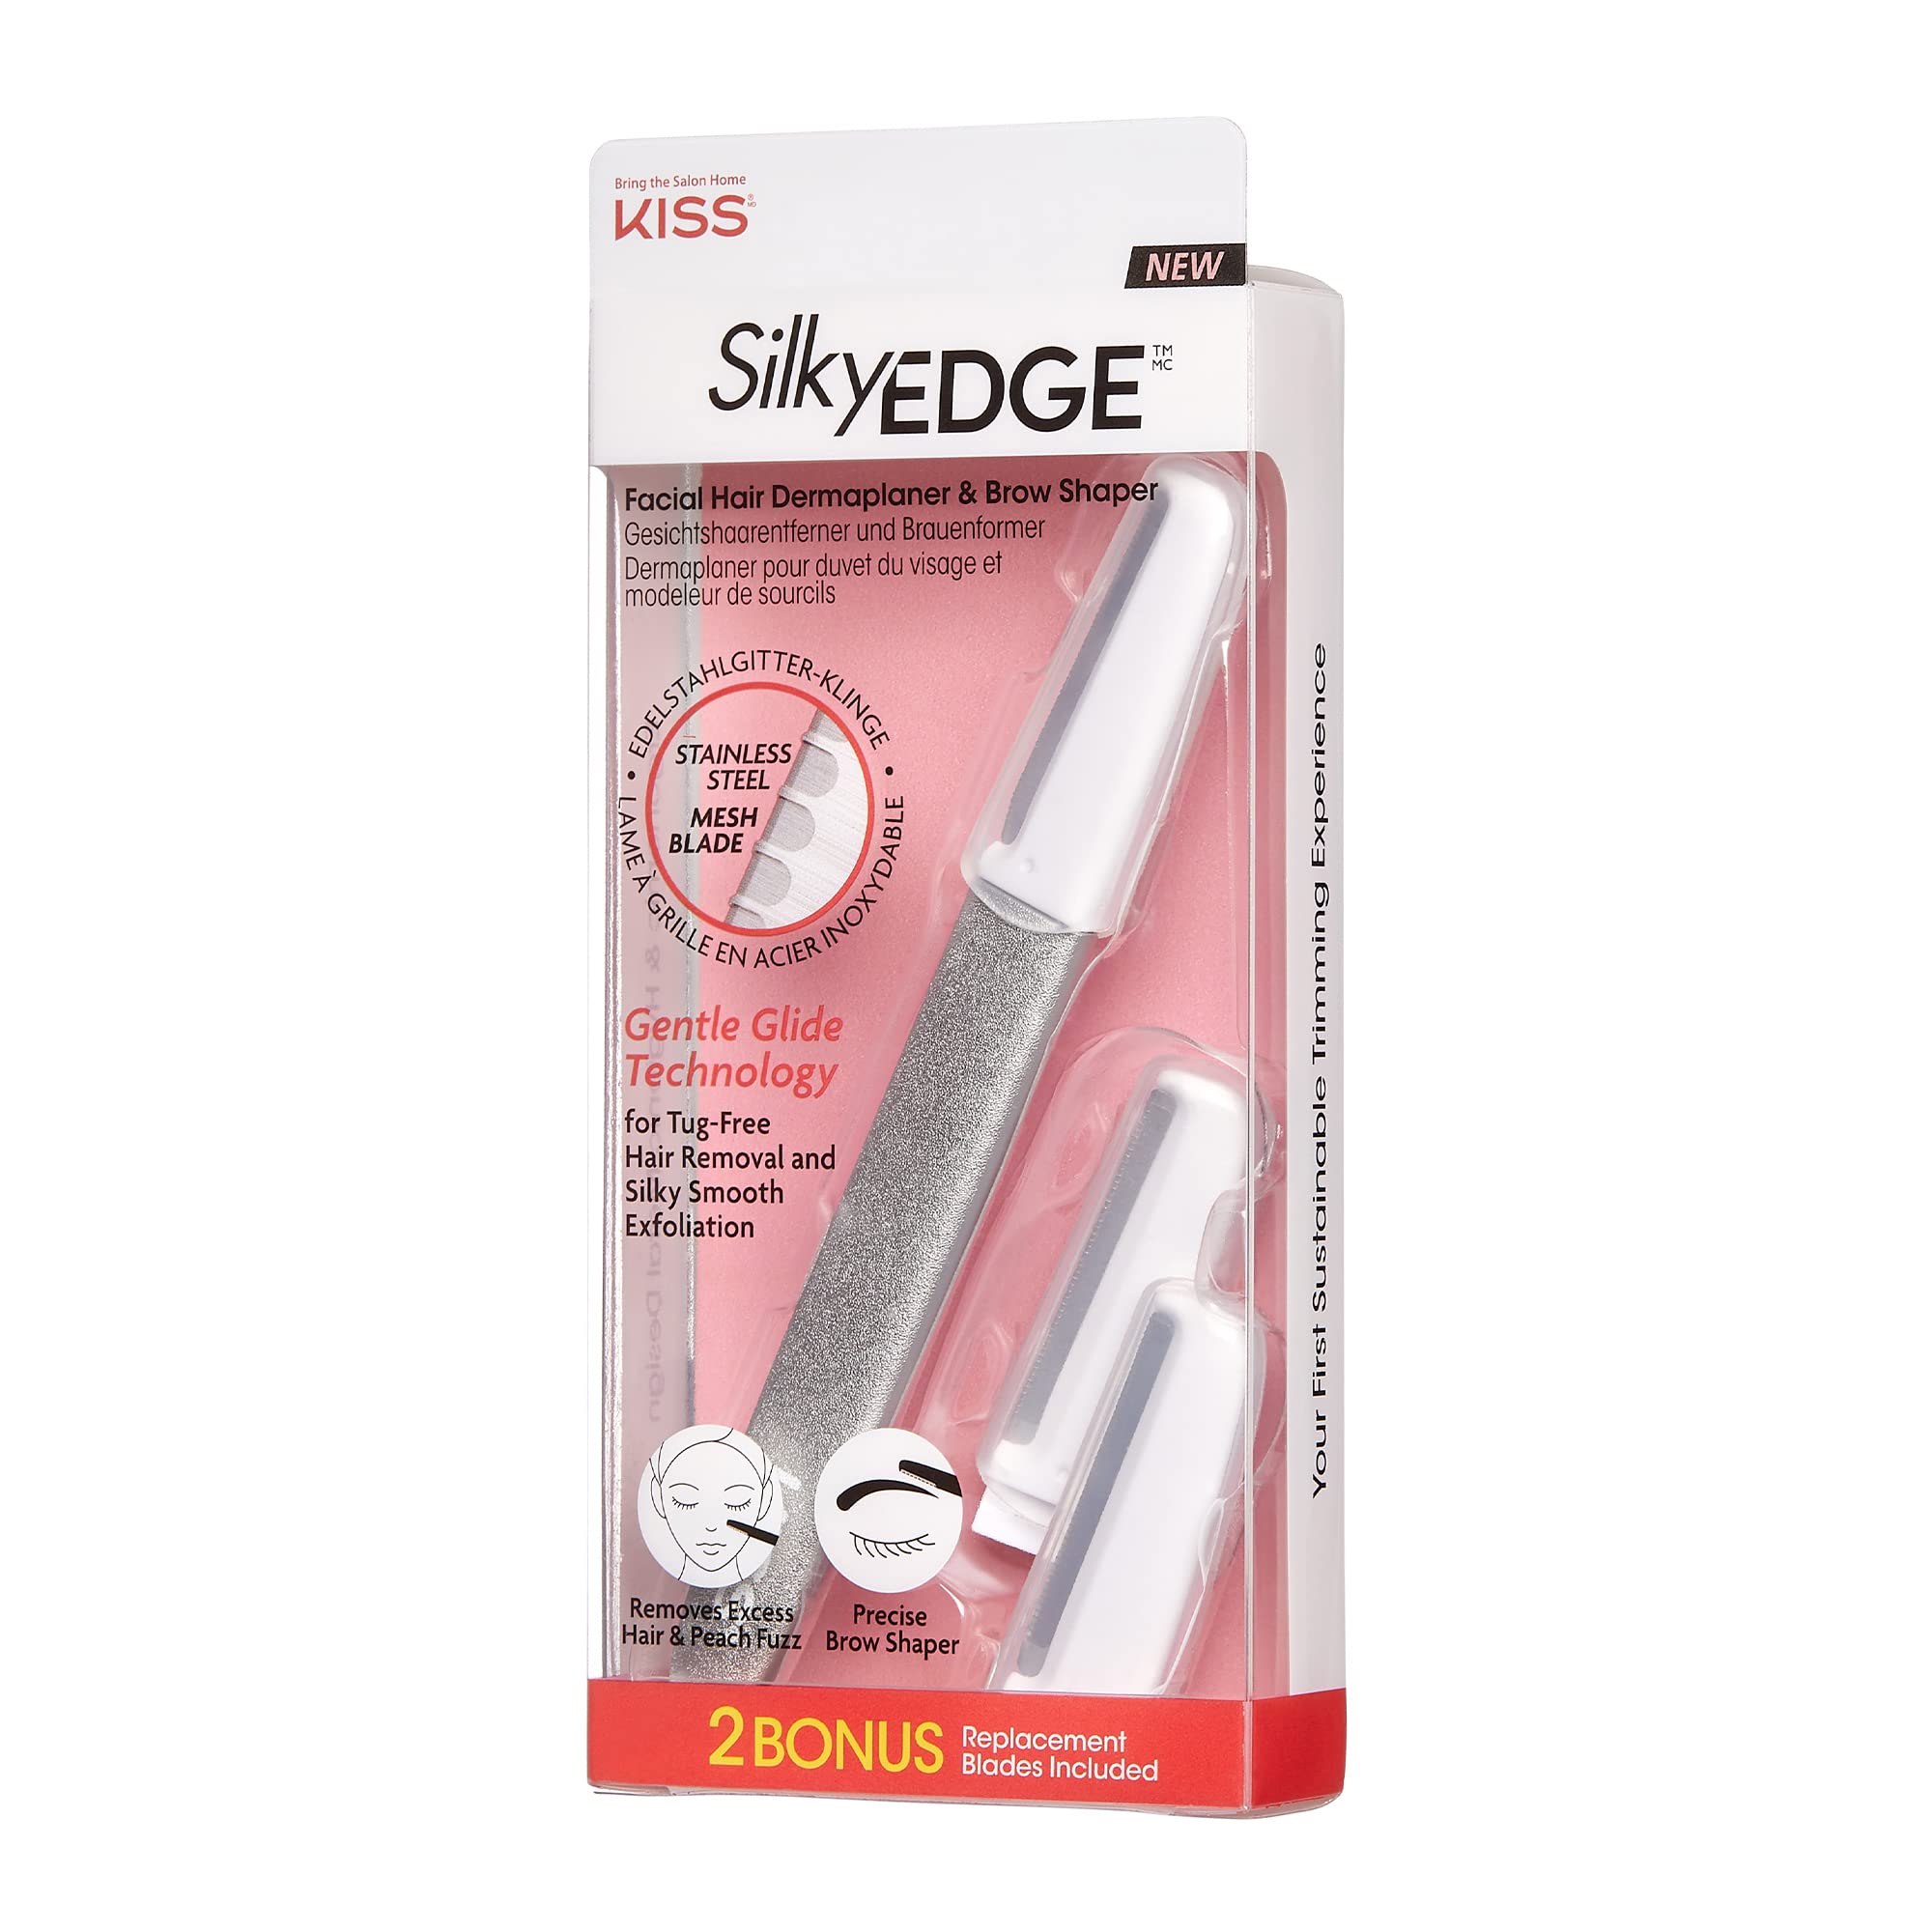 KISS Silky Edge Facial Hair Dermaplaner & Brow Shaper, Stainless Steel Mesh Blade, Gentle Glide Technology, with 2 Bonus Replacement Blades